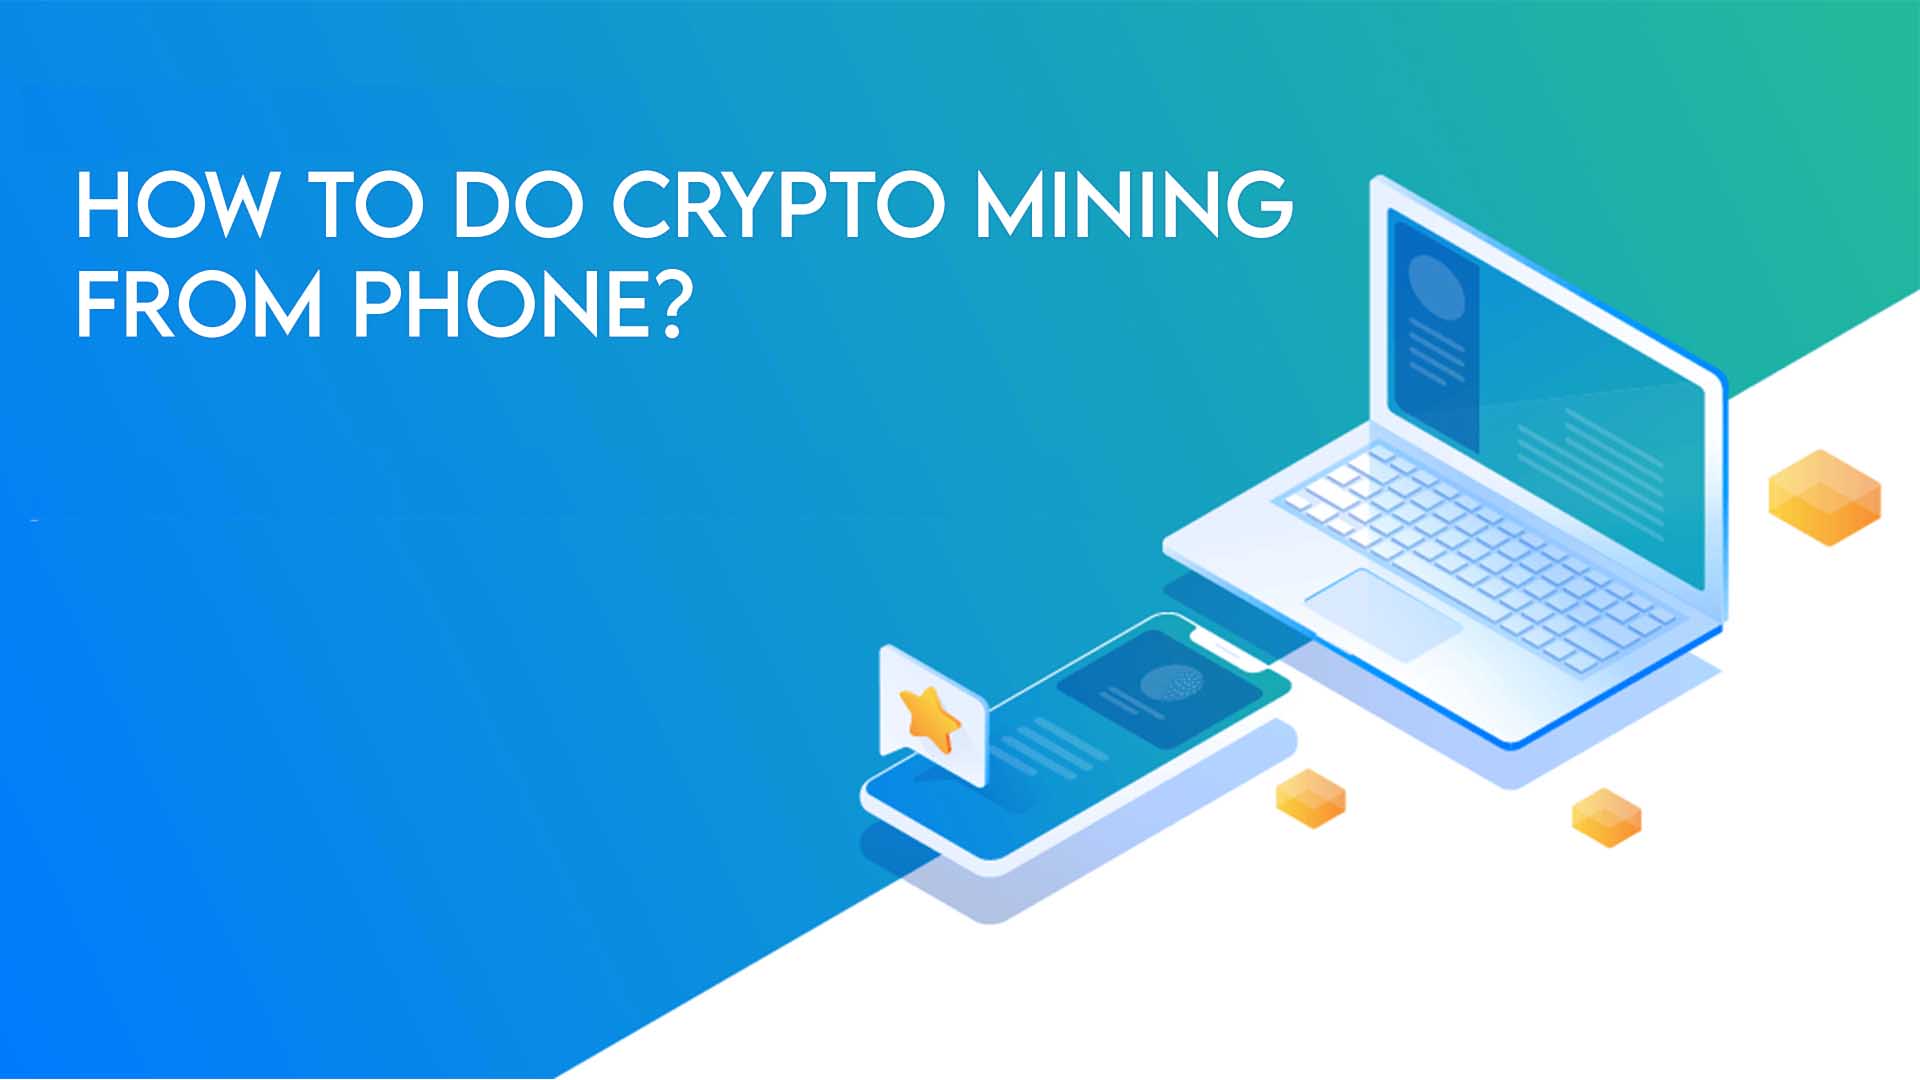 How to do Crypto Mining from Phone?